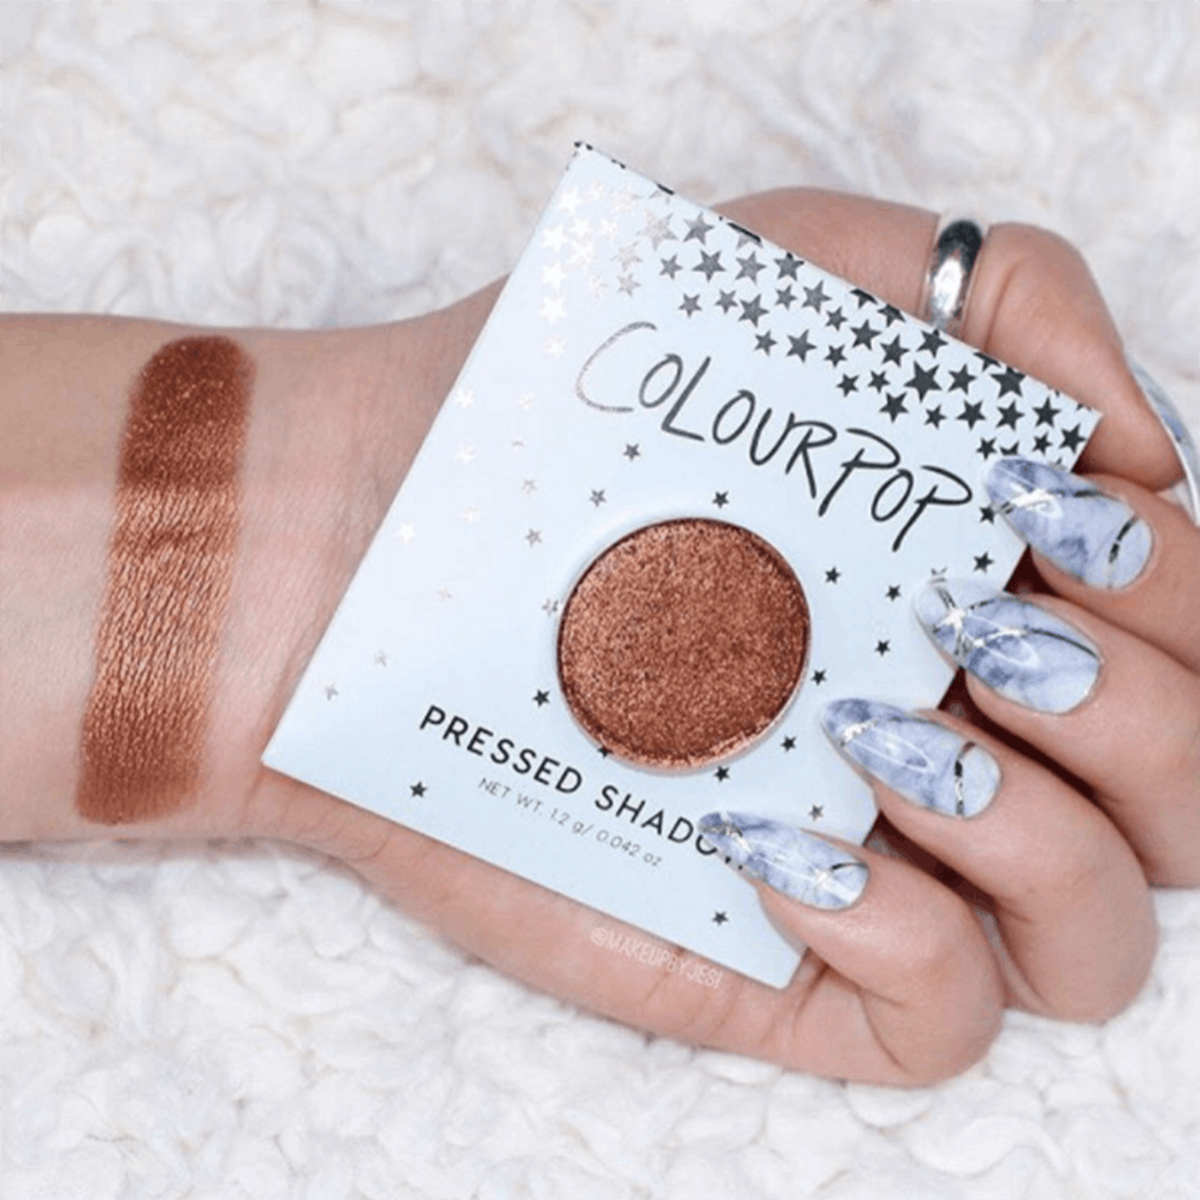 Here Is How to Snag a FREE ColourPop Eyeshadow